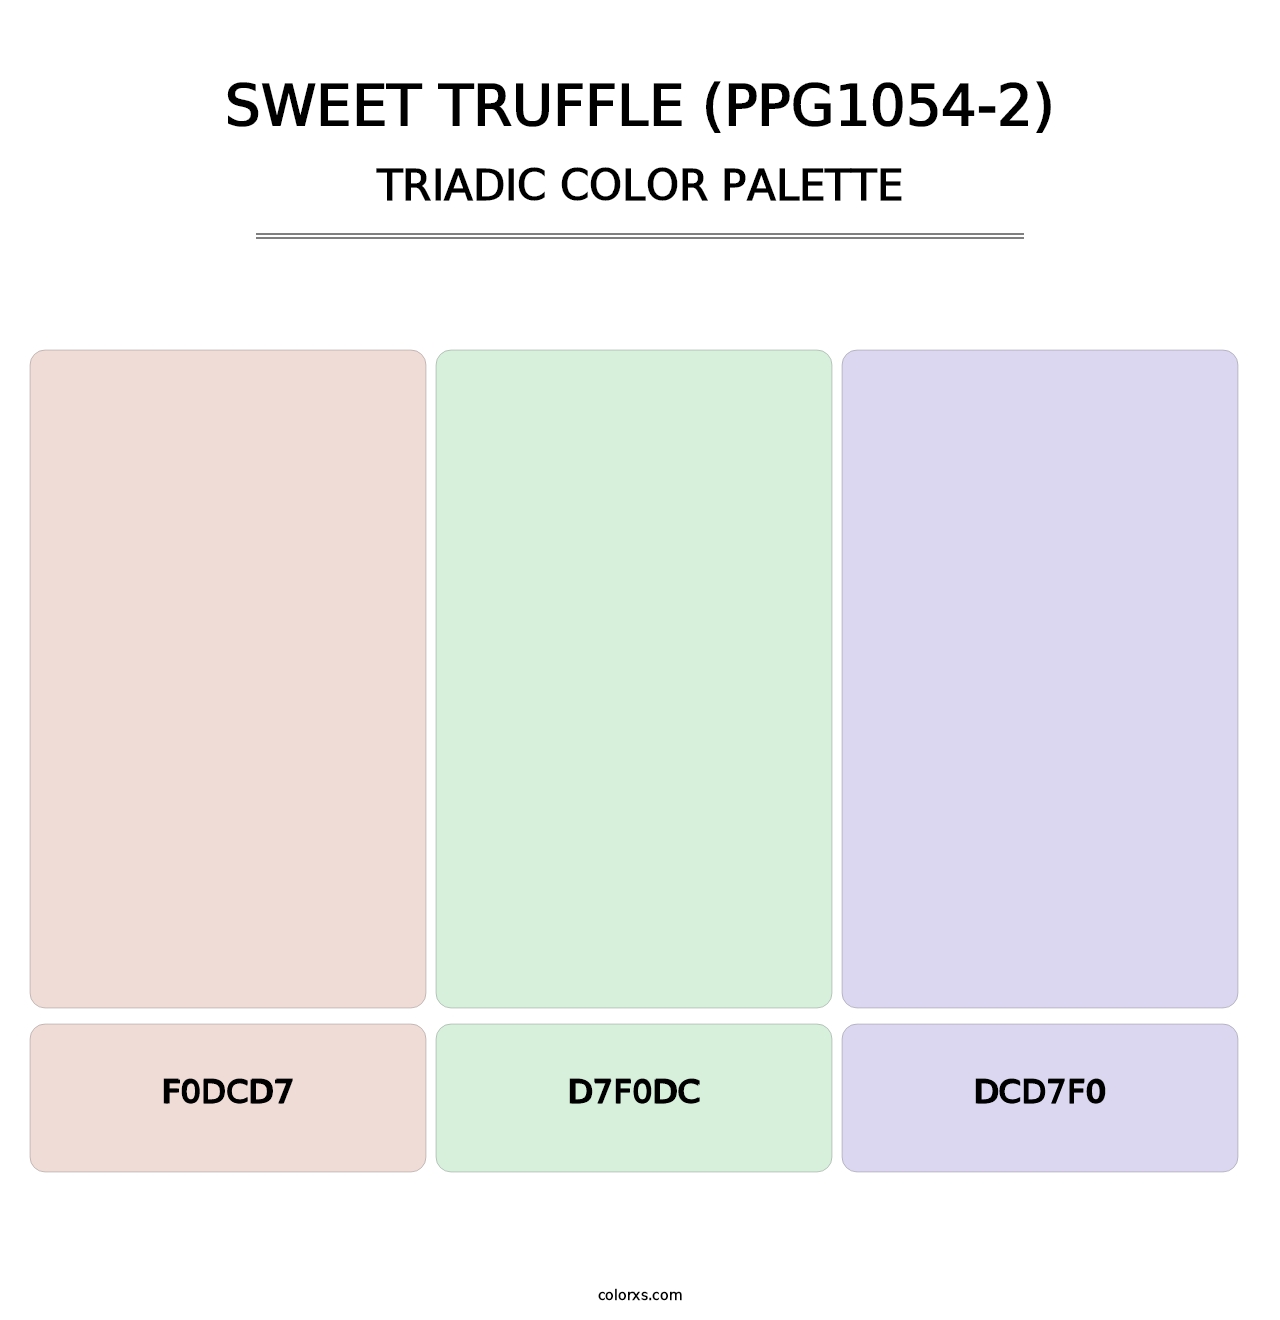 Sweet Truffle (PPG1054-2) - Triadic Color Palette